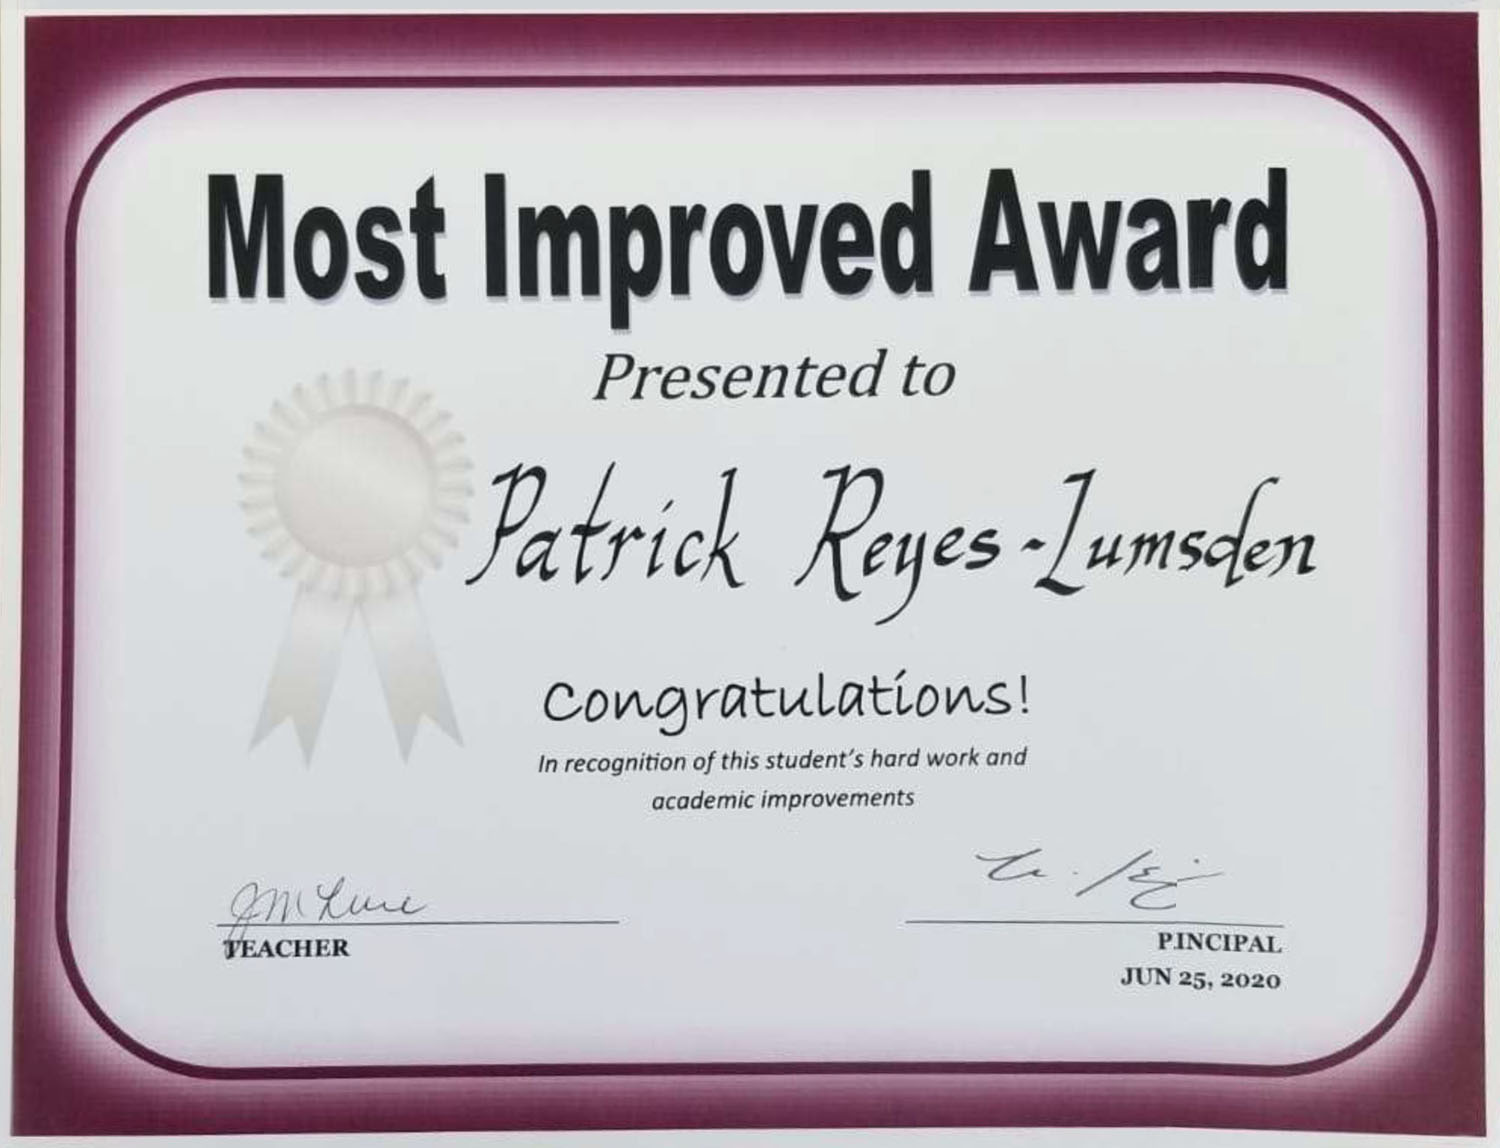 Patrick's Certificate-Most Improved